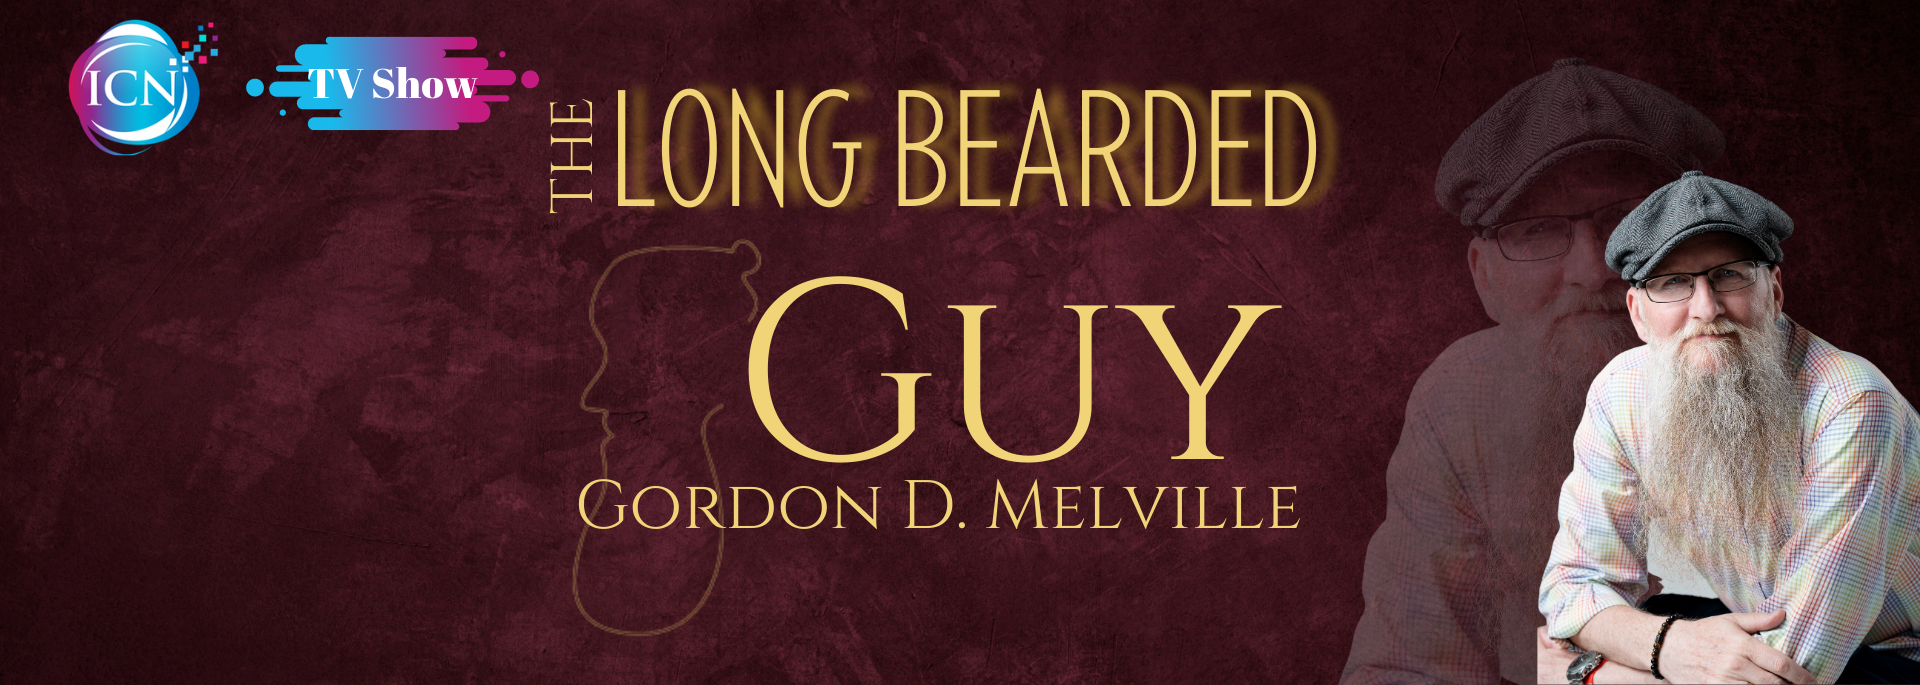 The Long Bearded Guy With Gordon D Melville channel